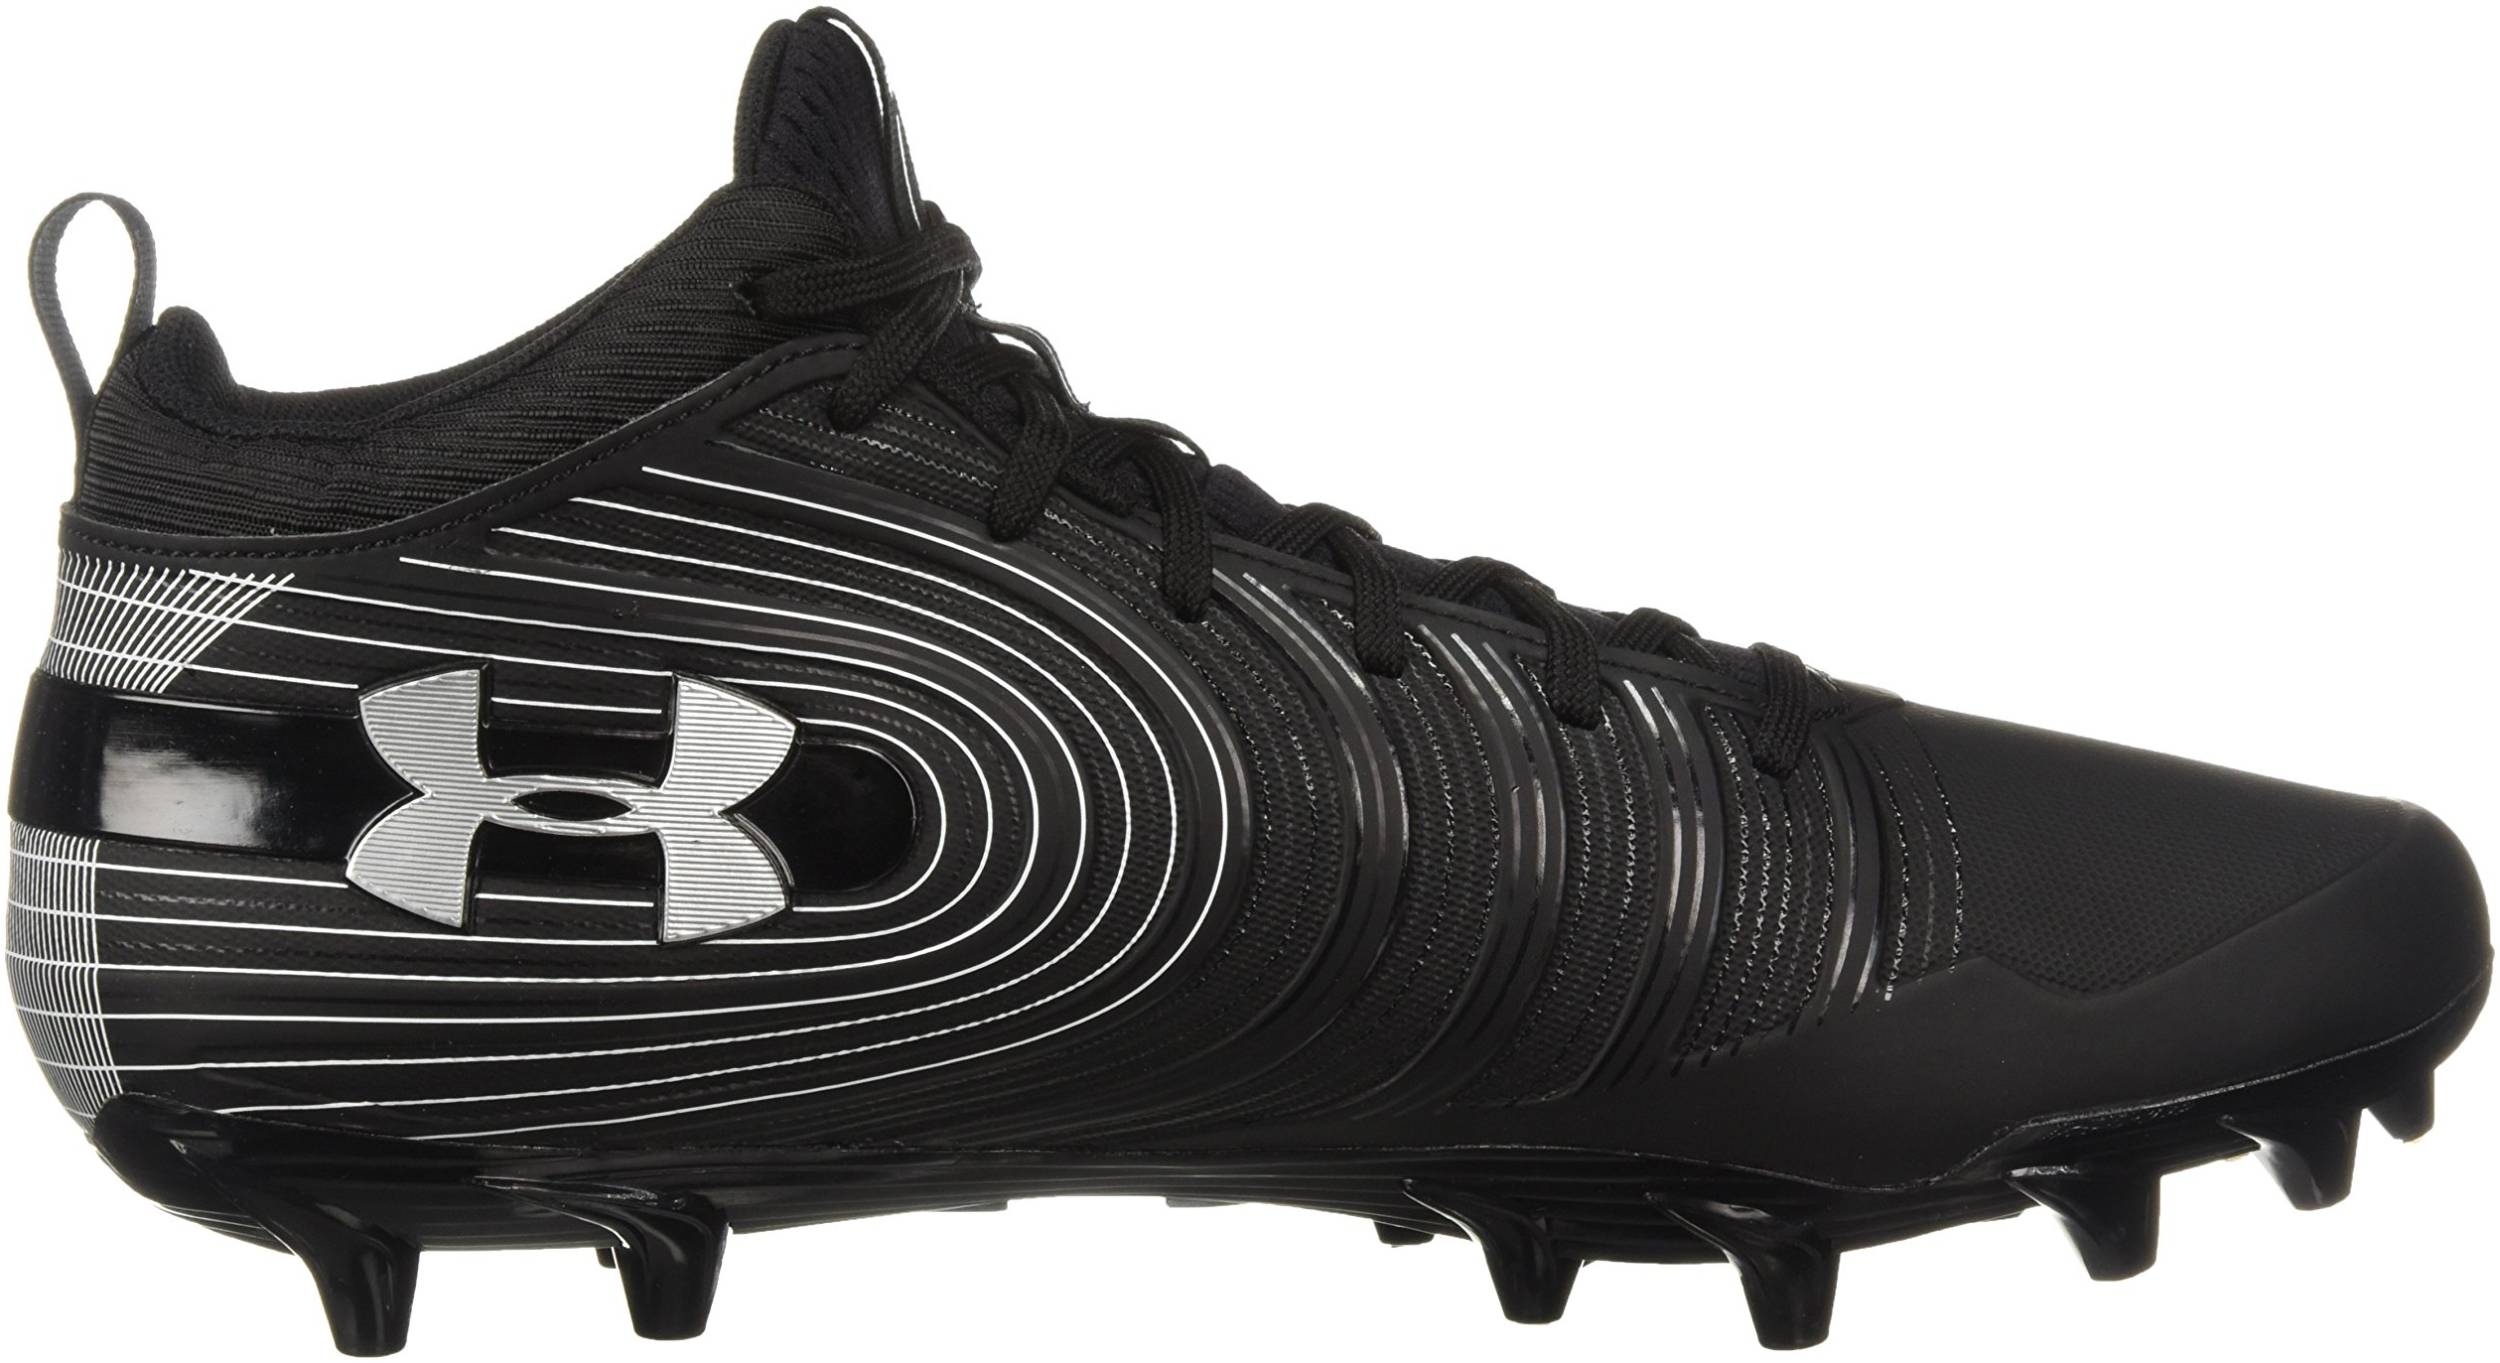 Details about   Under Armour Adult Nitro Mid Black MC Football Cleats 3000181-001